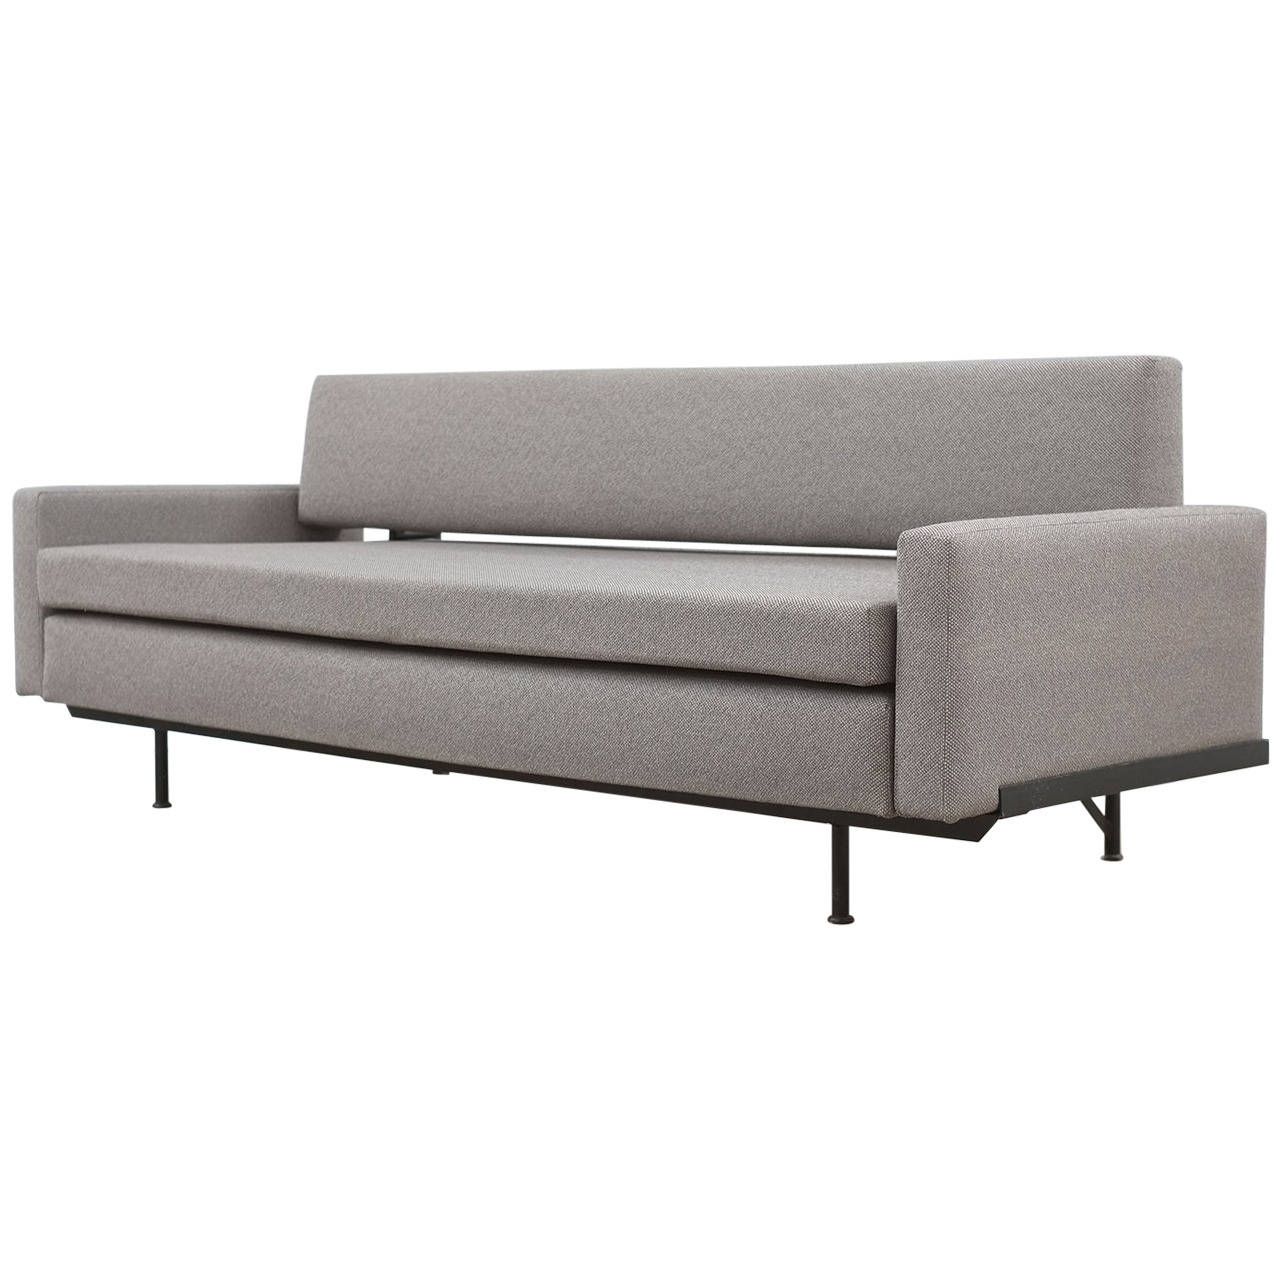 Florence Knoll Sofa Bed Rs Gold Sofa With Regard To Florence Sofa Beds (View 2 of 15)